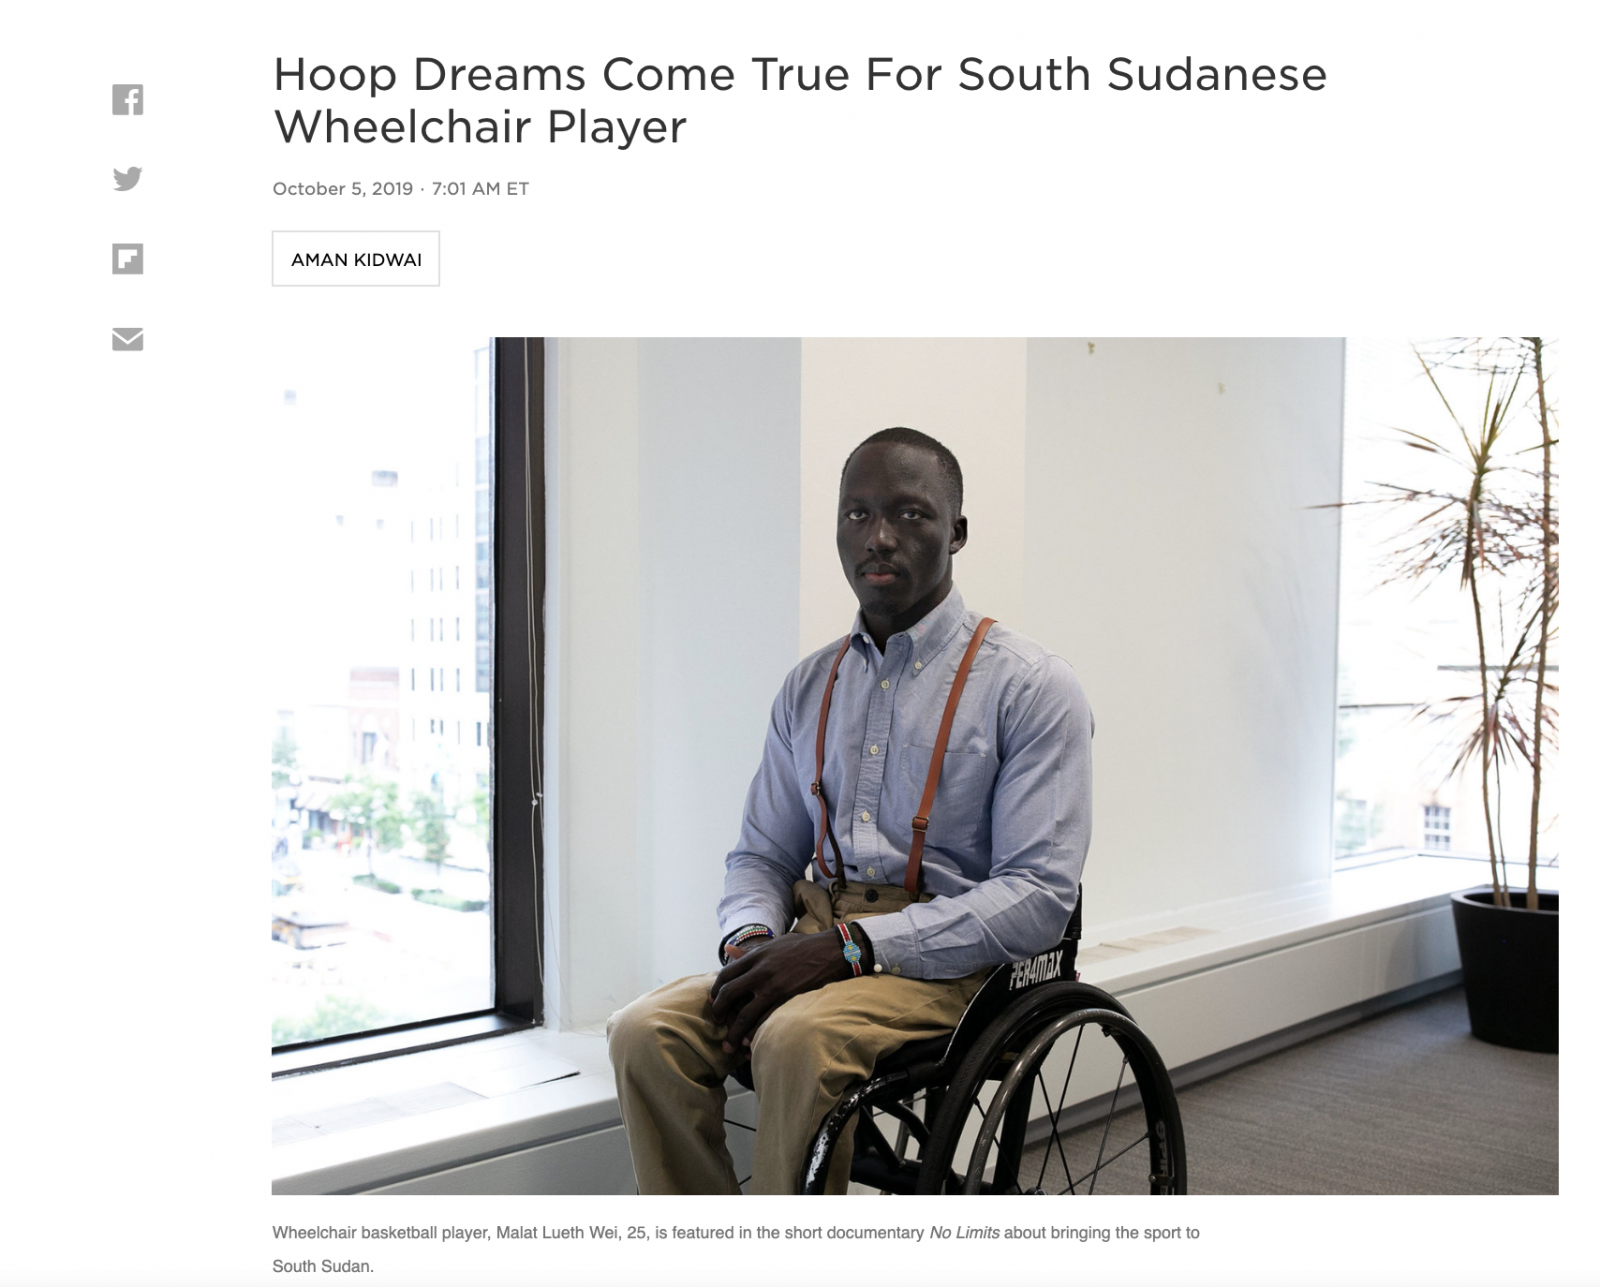 On NPR: Hoop Dreams Come True For South Sudanese Wheelchair Player